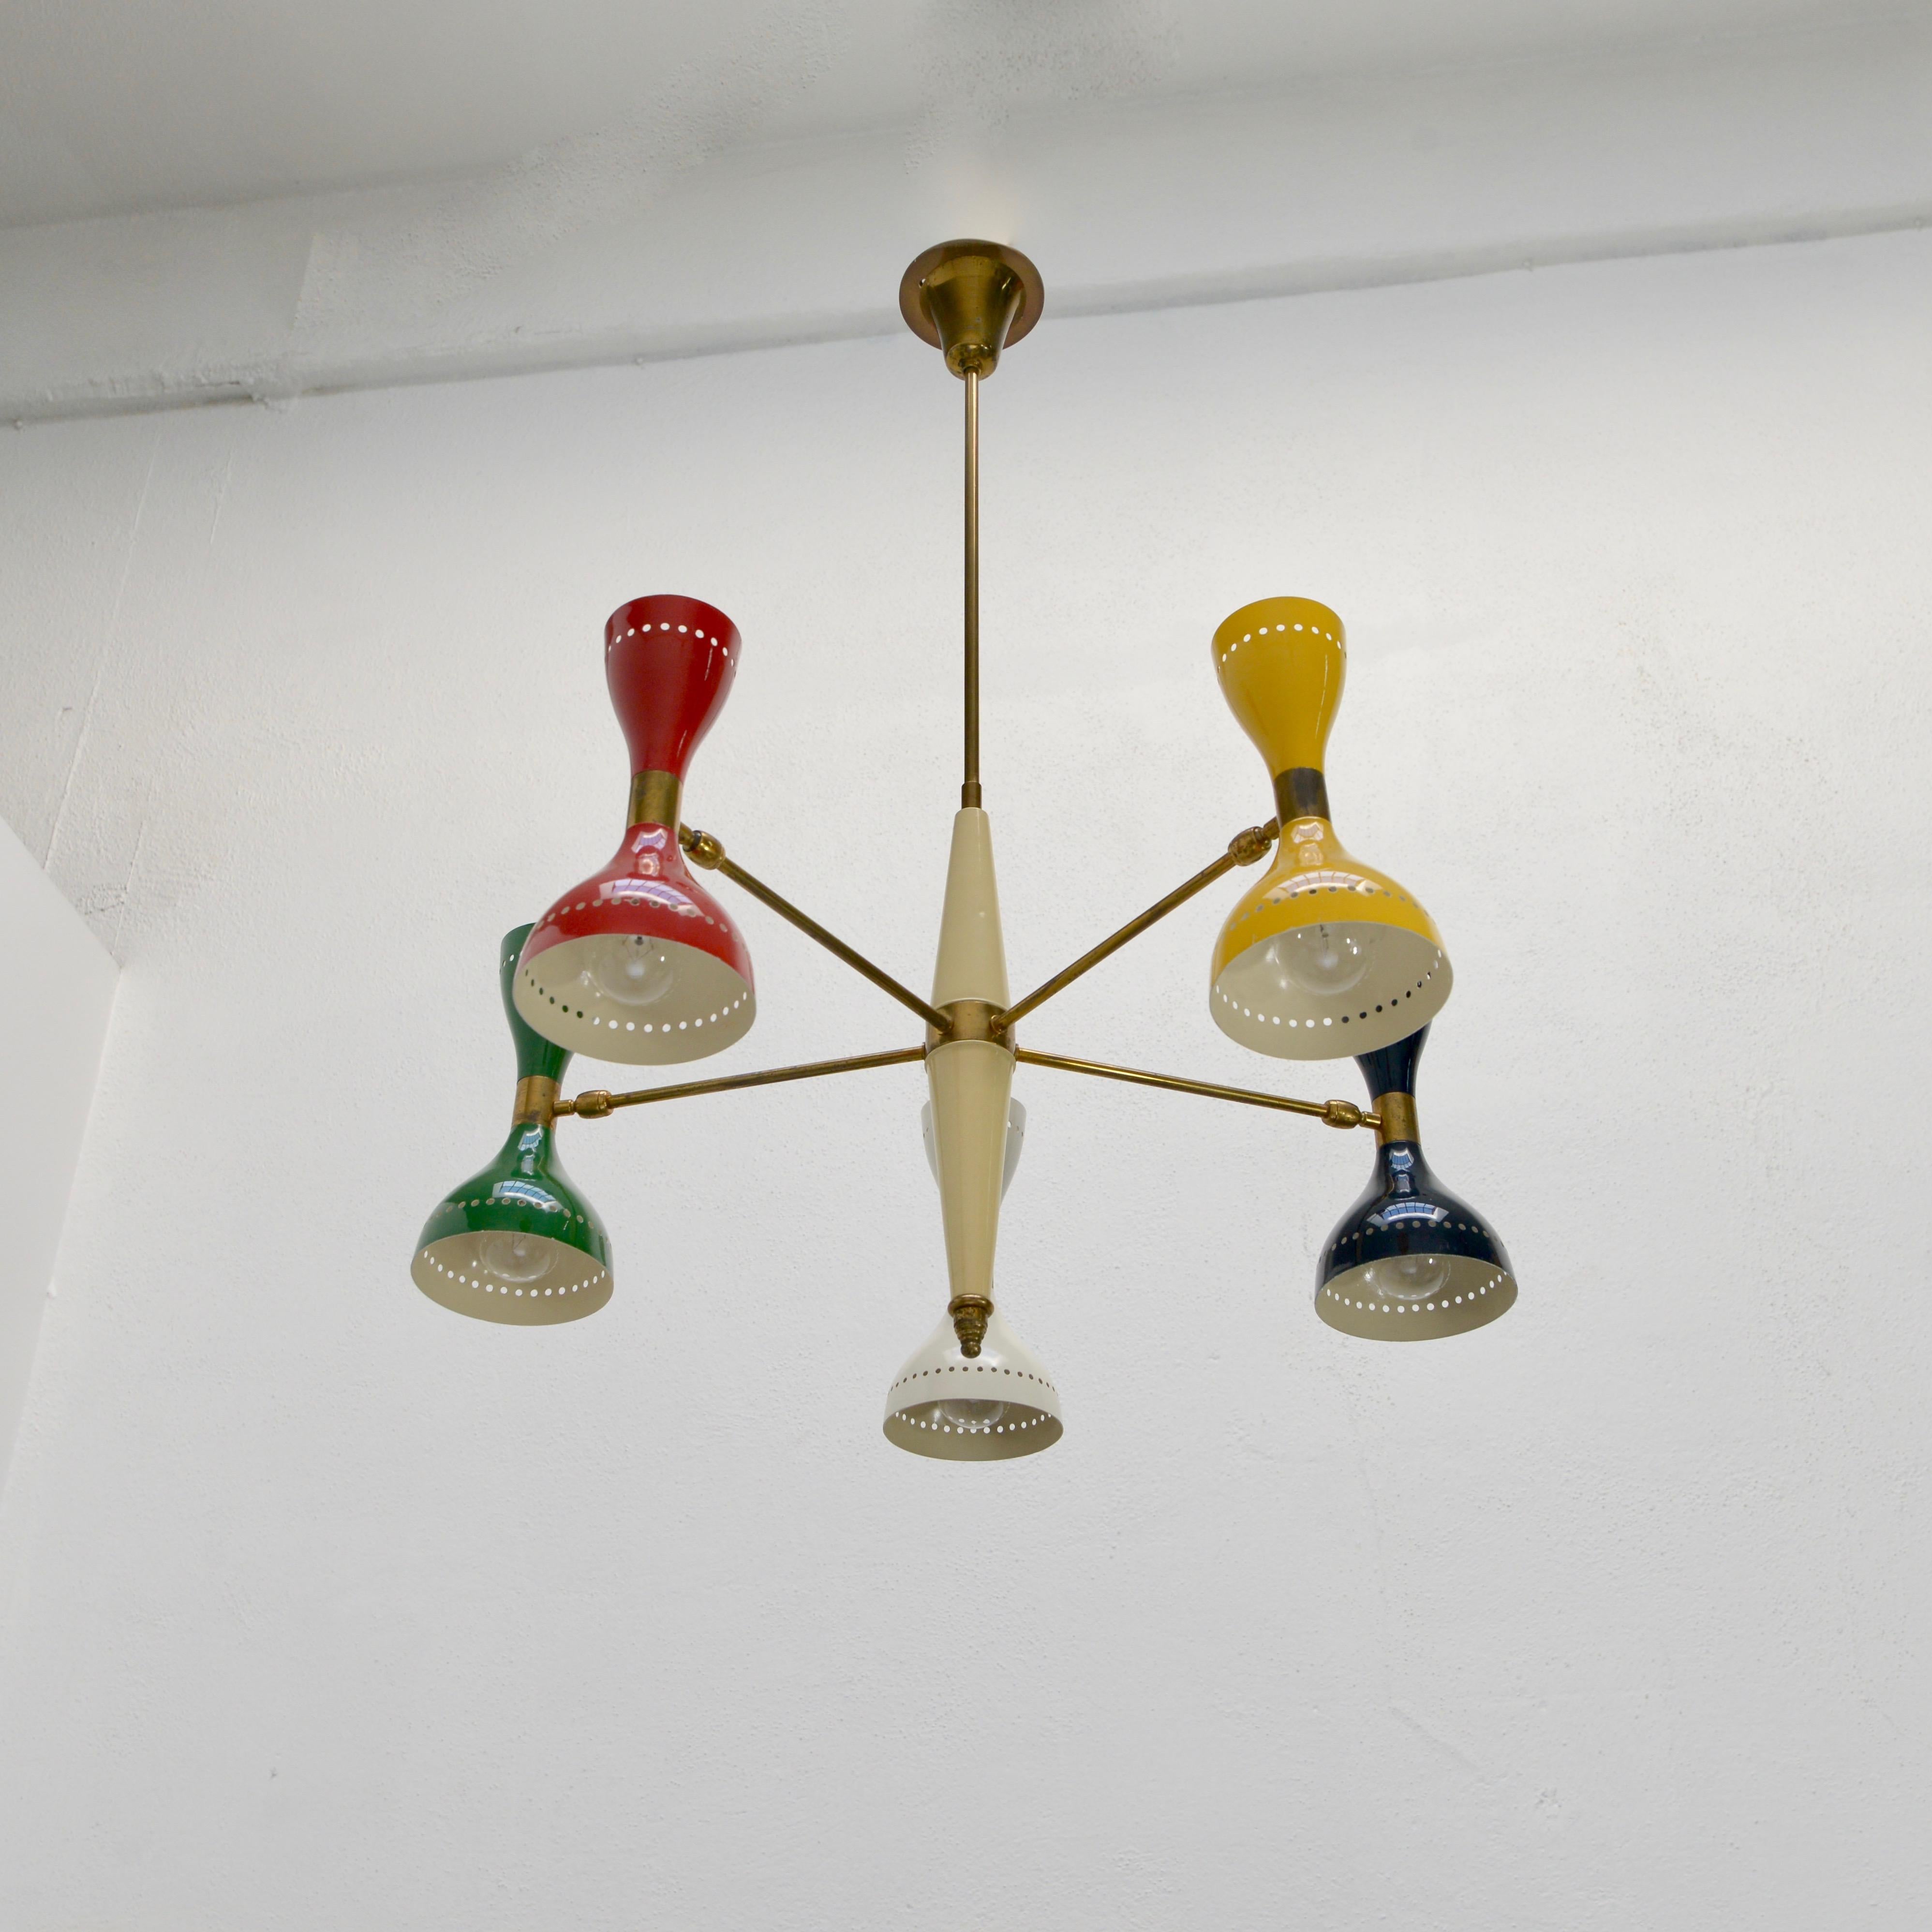 Stunning classical 5 shade Mid-Century Modern 1950s Italian chandelier in the style of Stilnovo. Original finish, adjustable shades, partially restored with 10-E12 candelabra based sockets (2) per shade (up and down). Wired for use in the US. Light